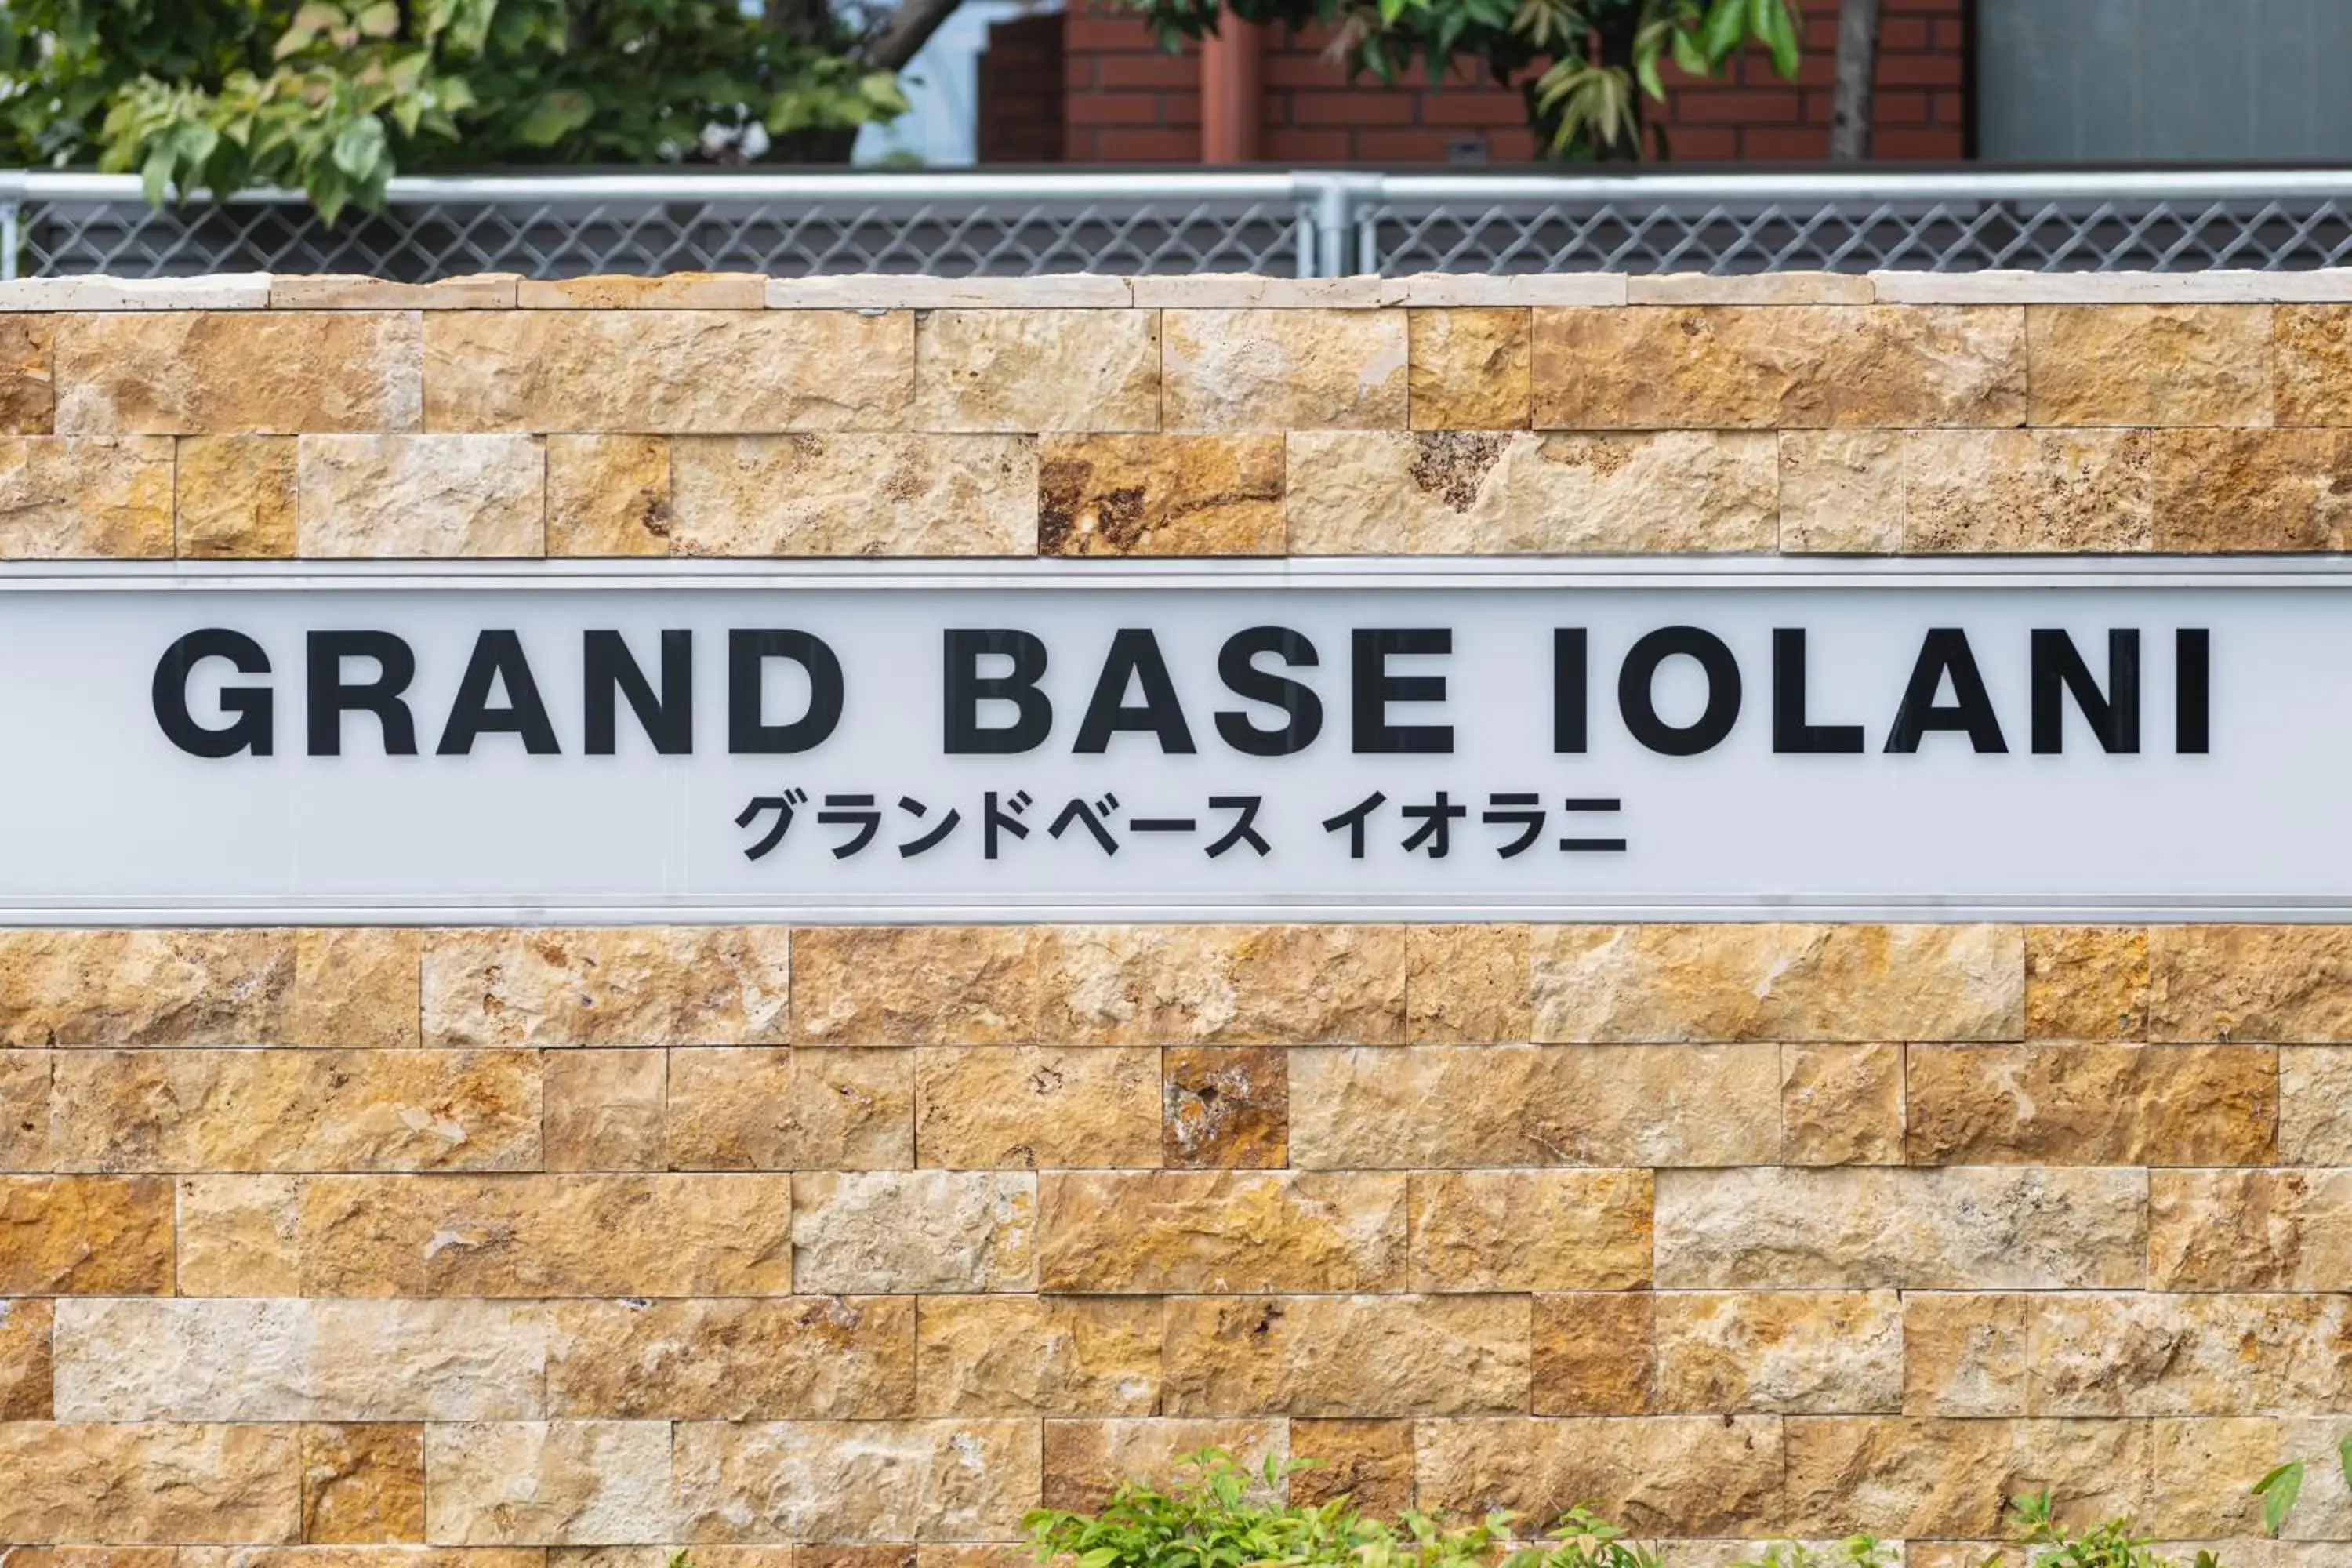 Property logo or sign in GRAND BASE Iolani